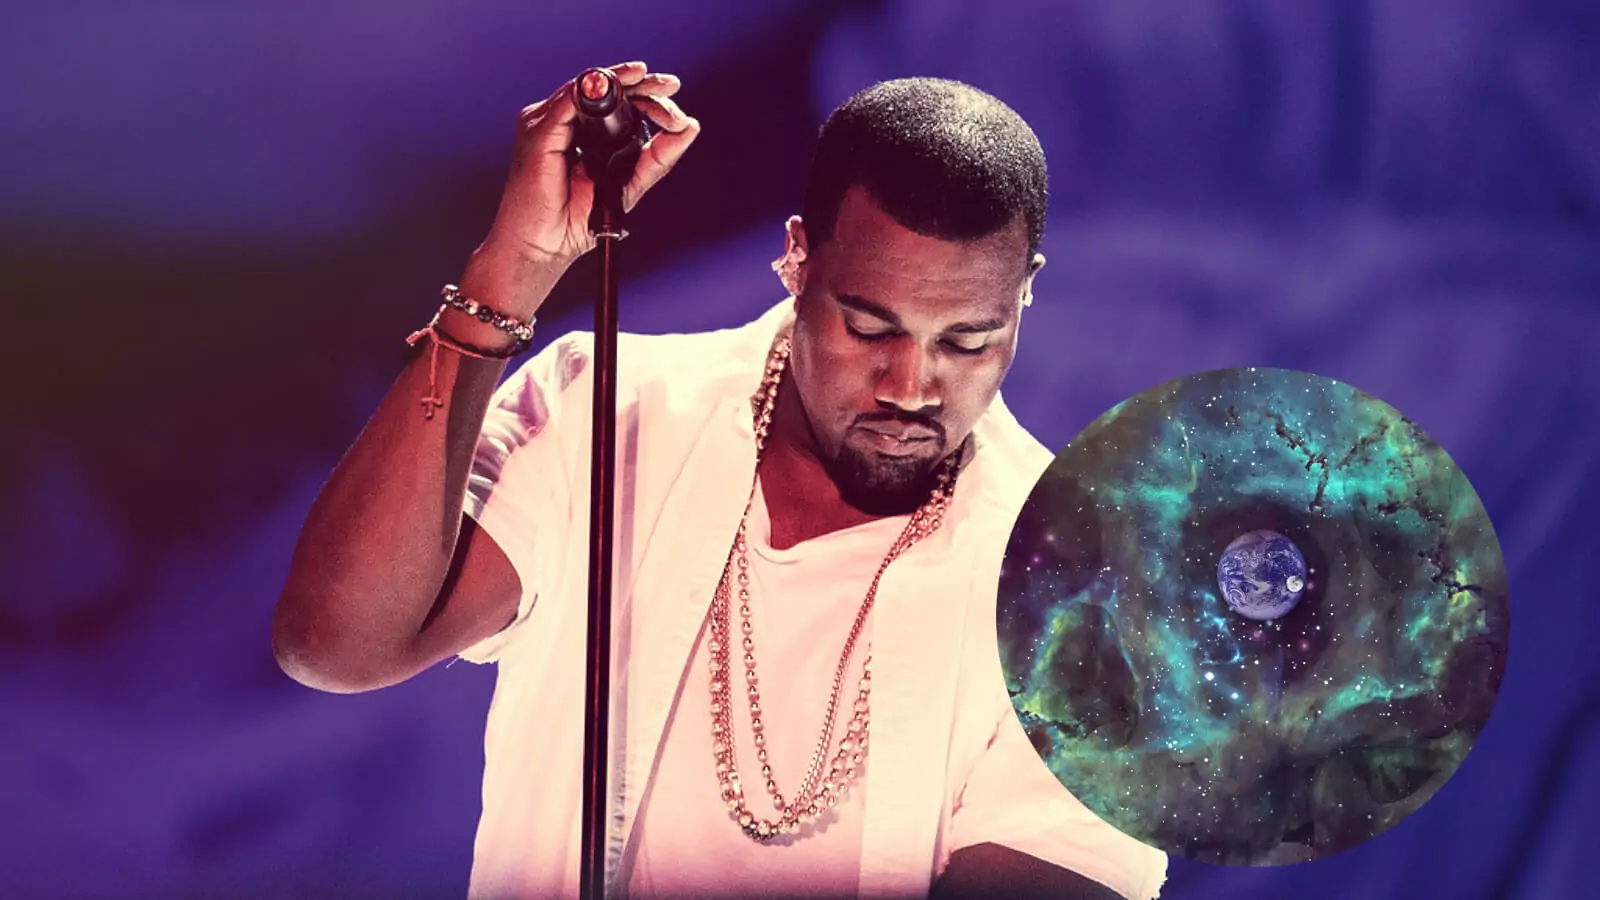 Which metal bands and albums Kanye West influenced?